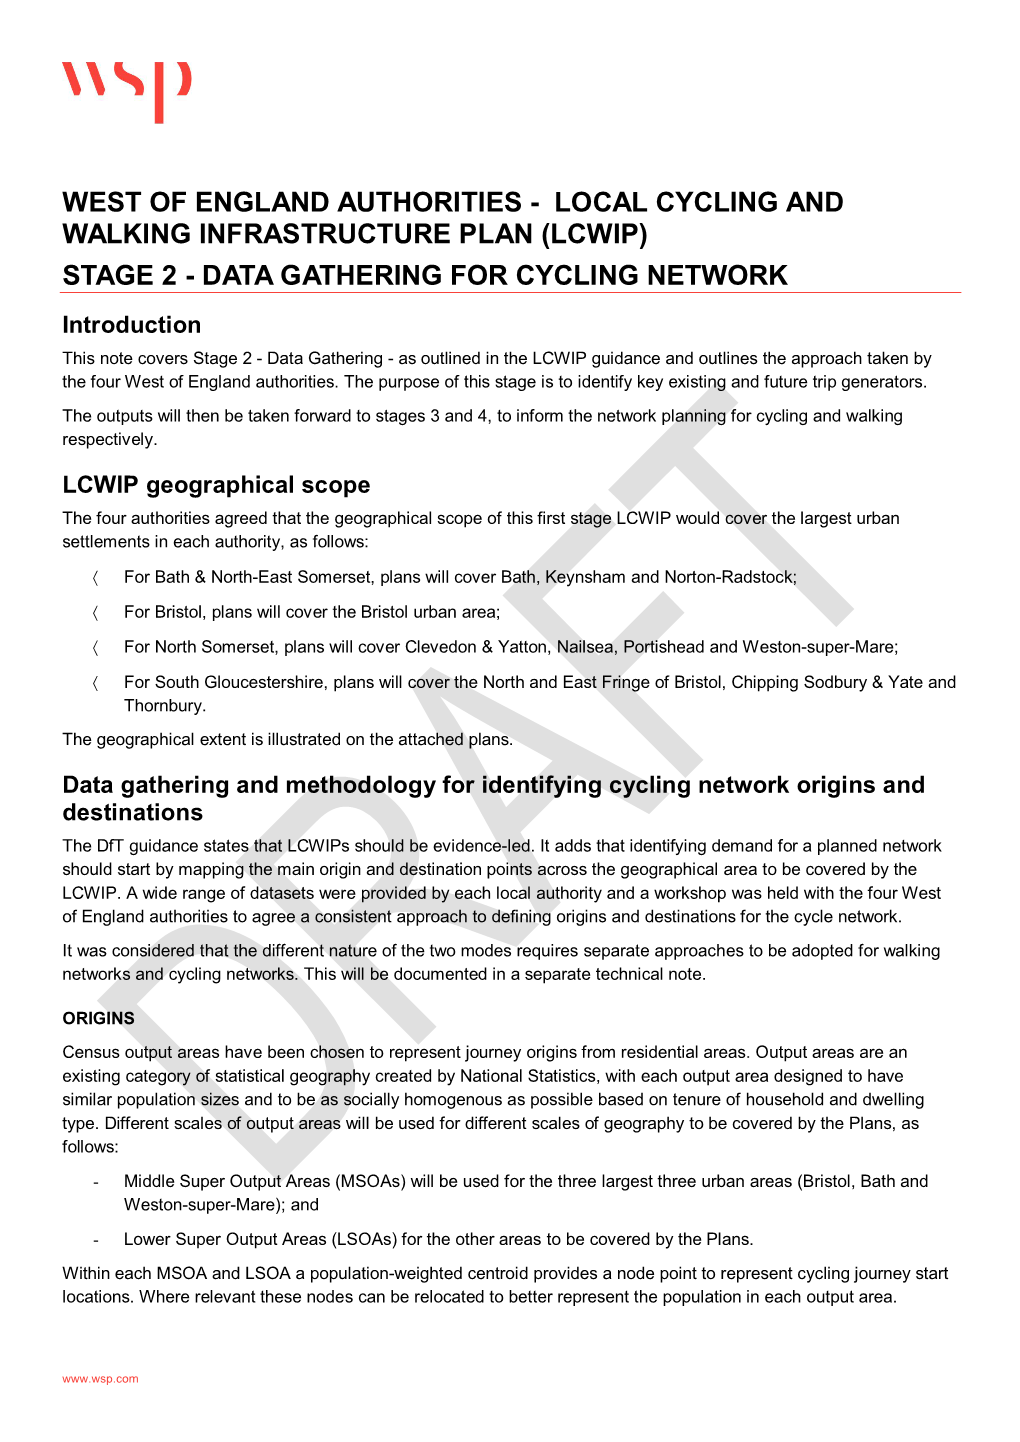 Local Cycling and Walking Infrastructure Plan (Lcwip) Stage 2